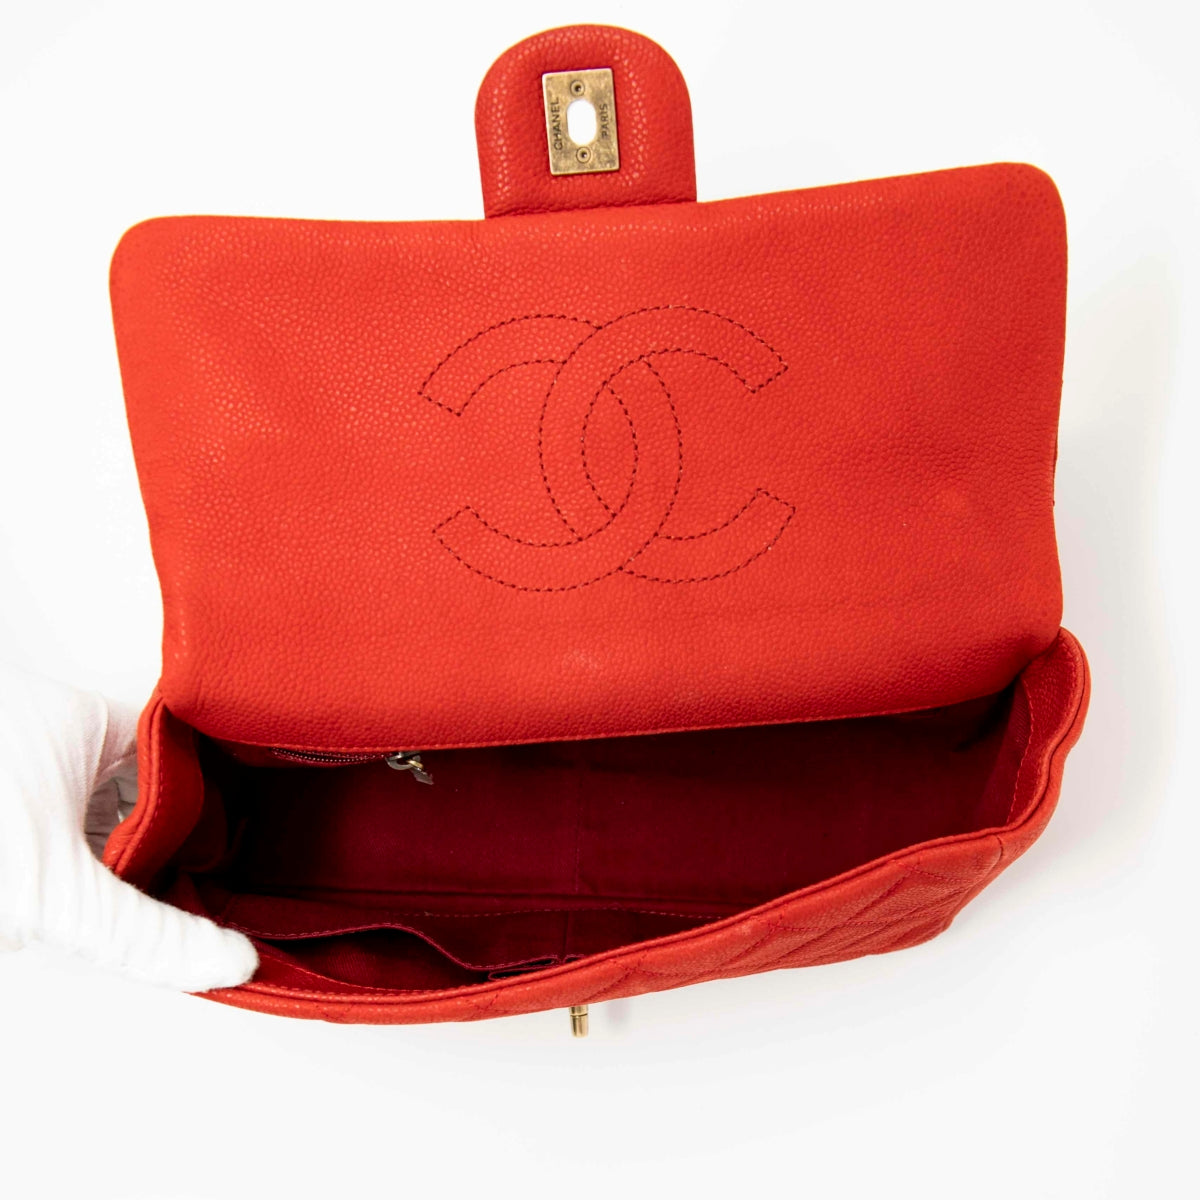 Chanel Red Easy Carry Flap